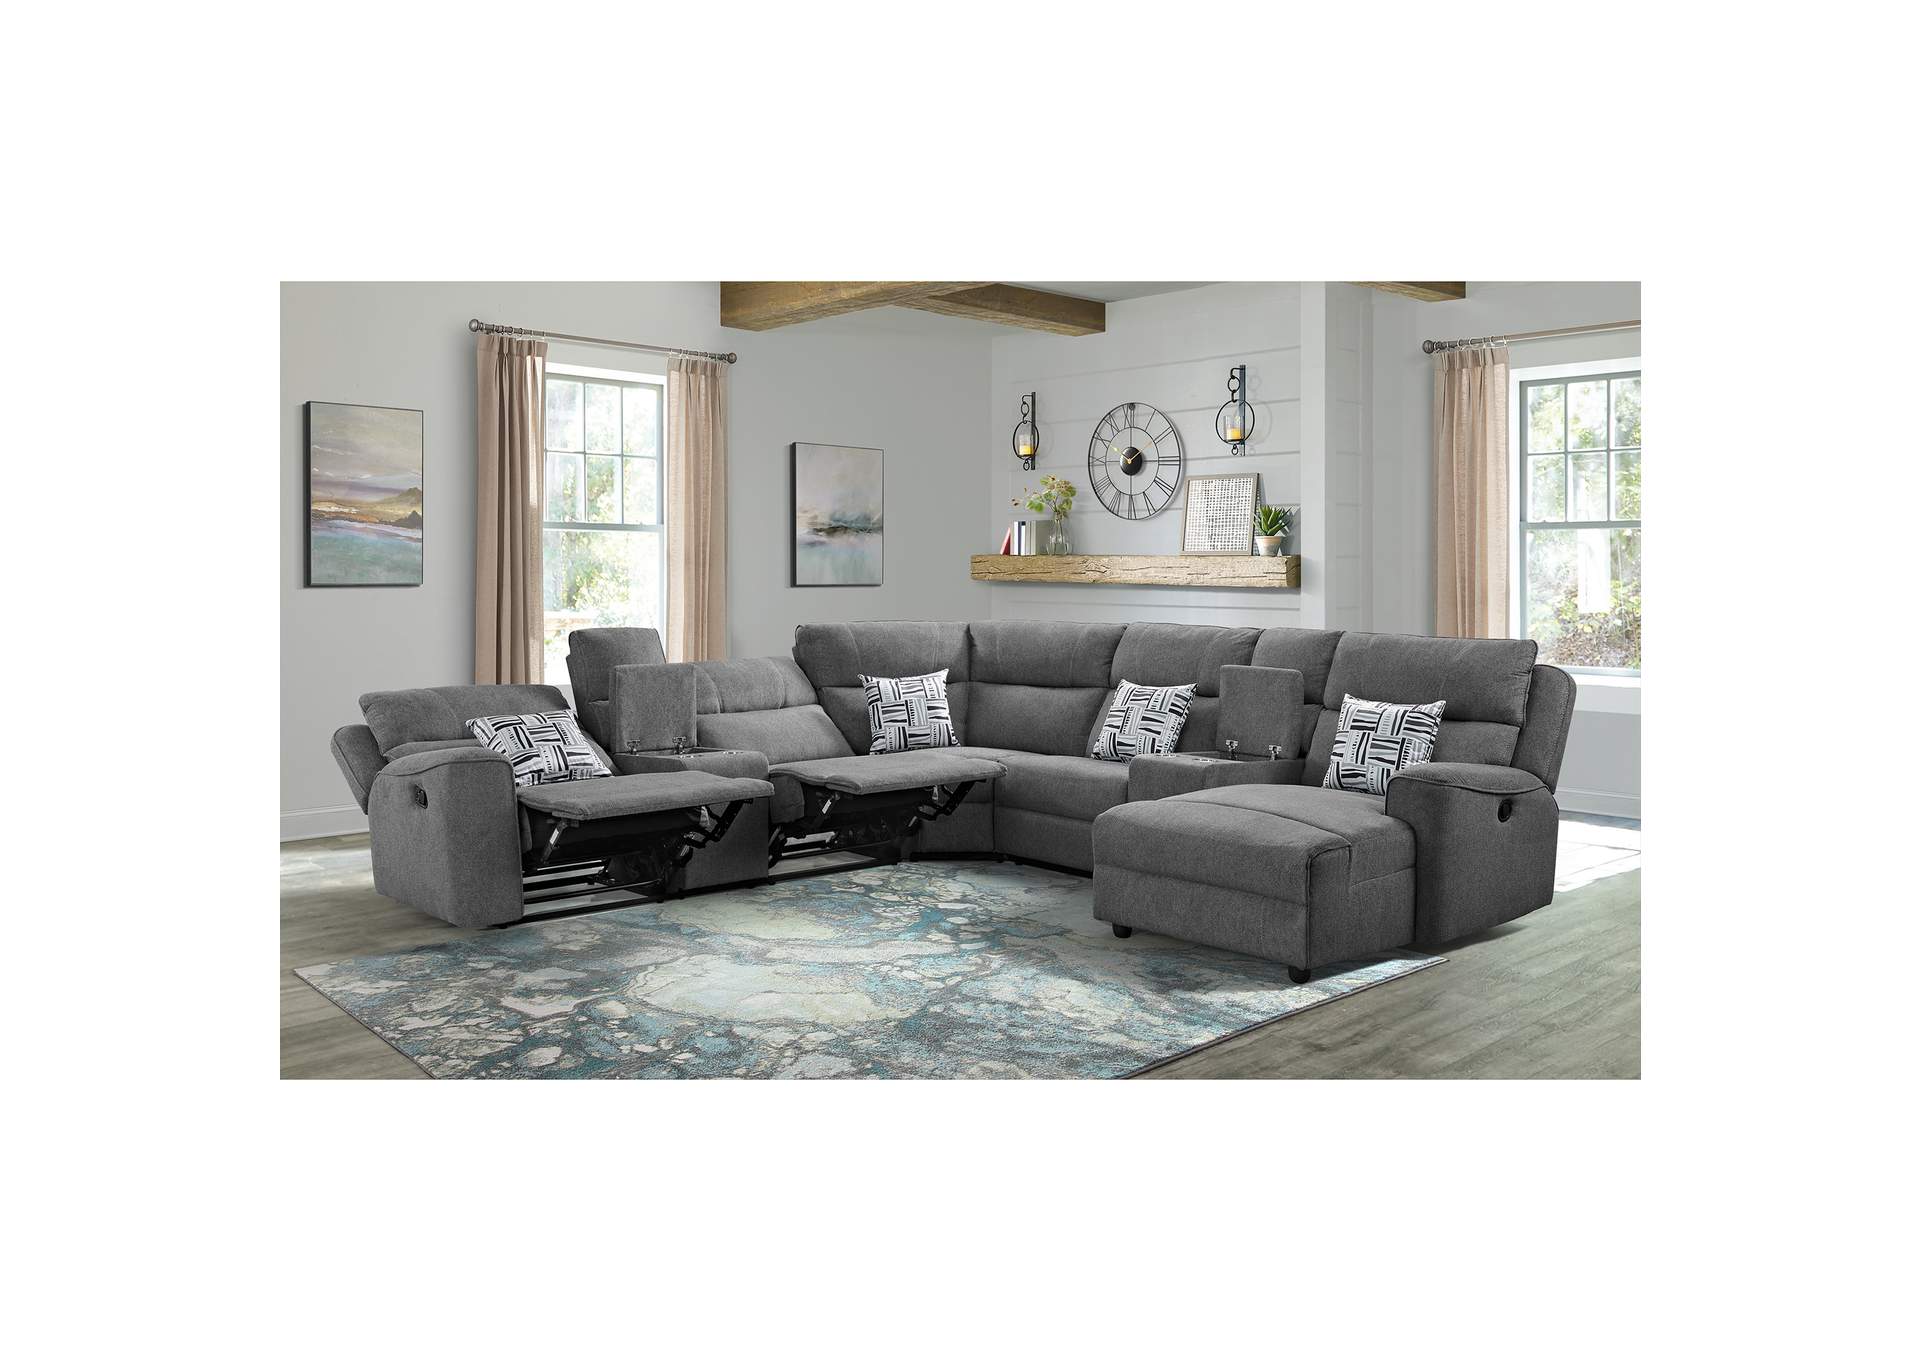 Connery Sectional Right Hand Facingreclining Chaise In Pewter,Elements